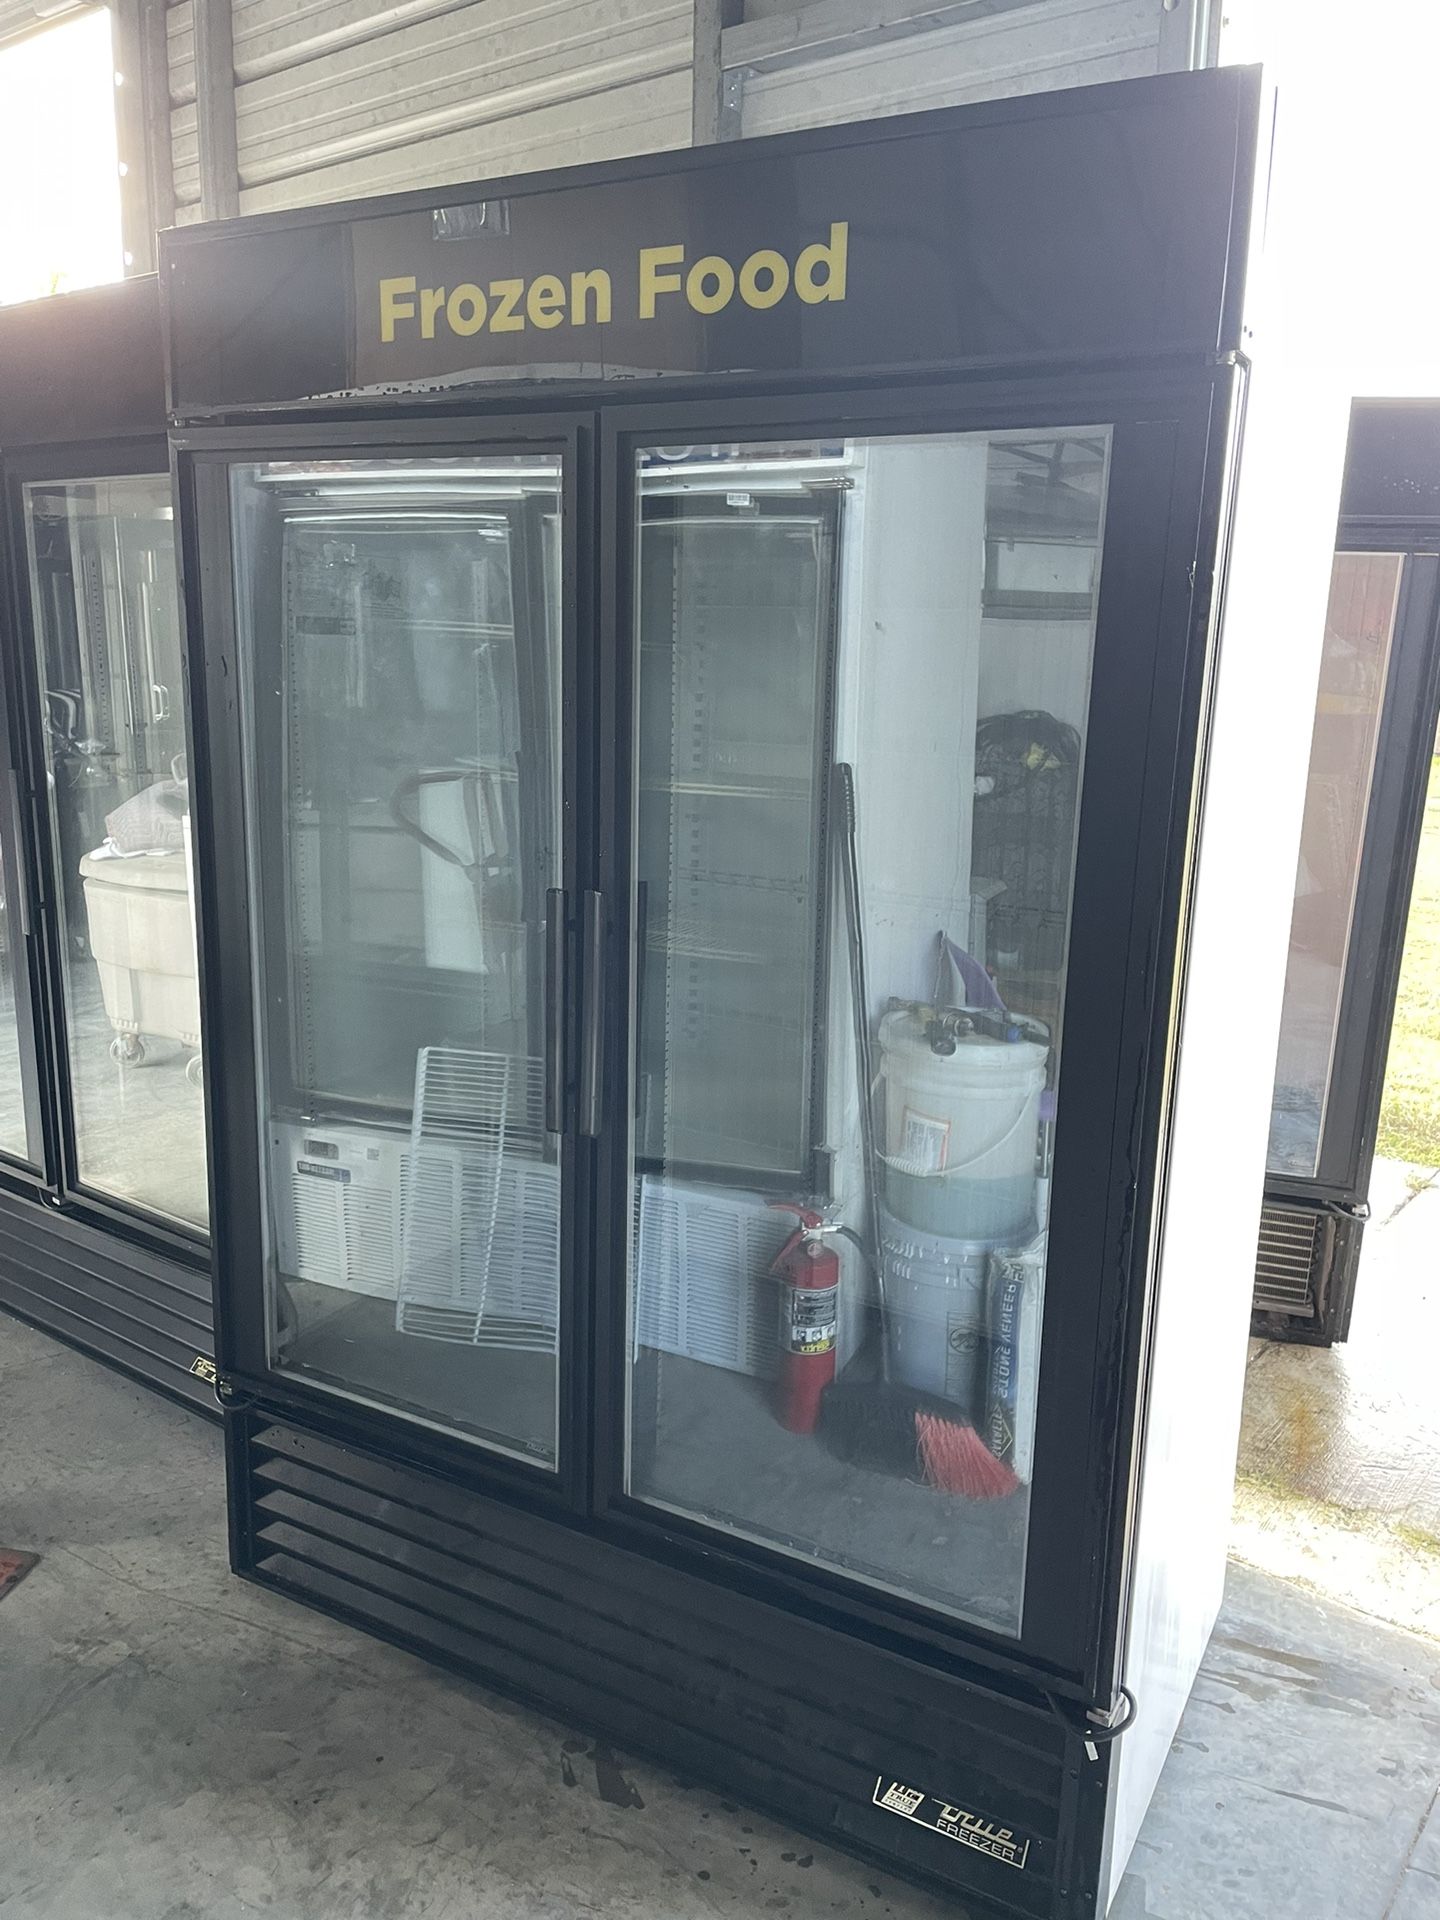 TWO DOOR GLASS FREEZER TRUE” GDM49F Excellent Condition!! All Shelves Included!